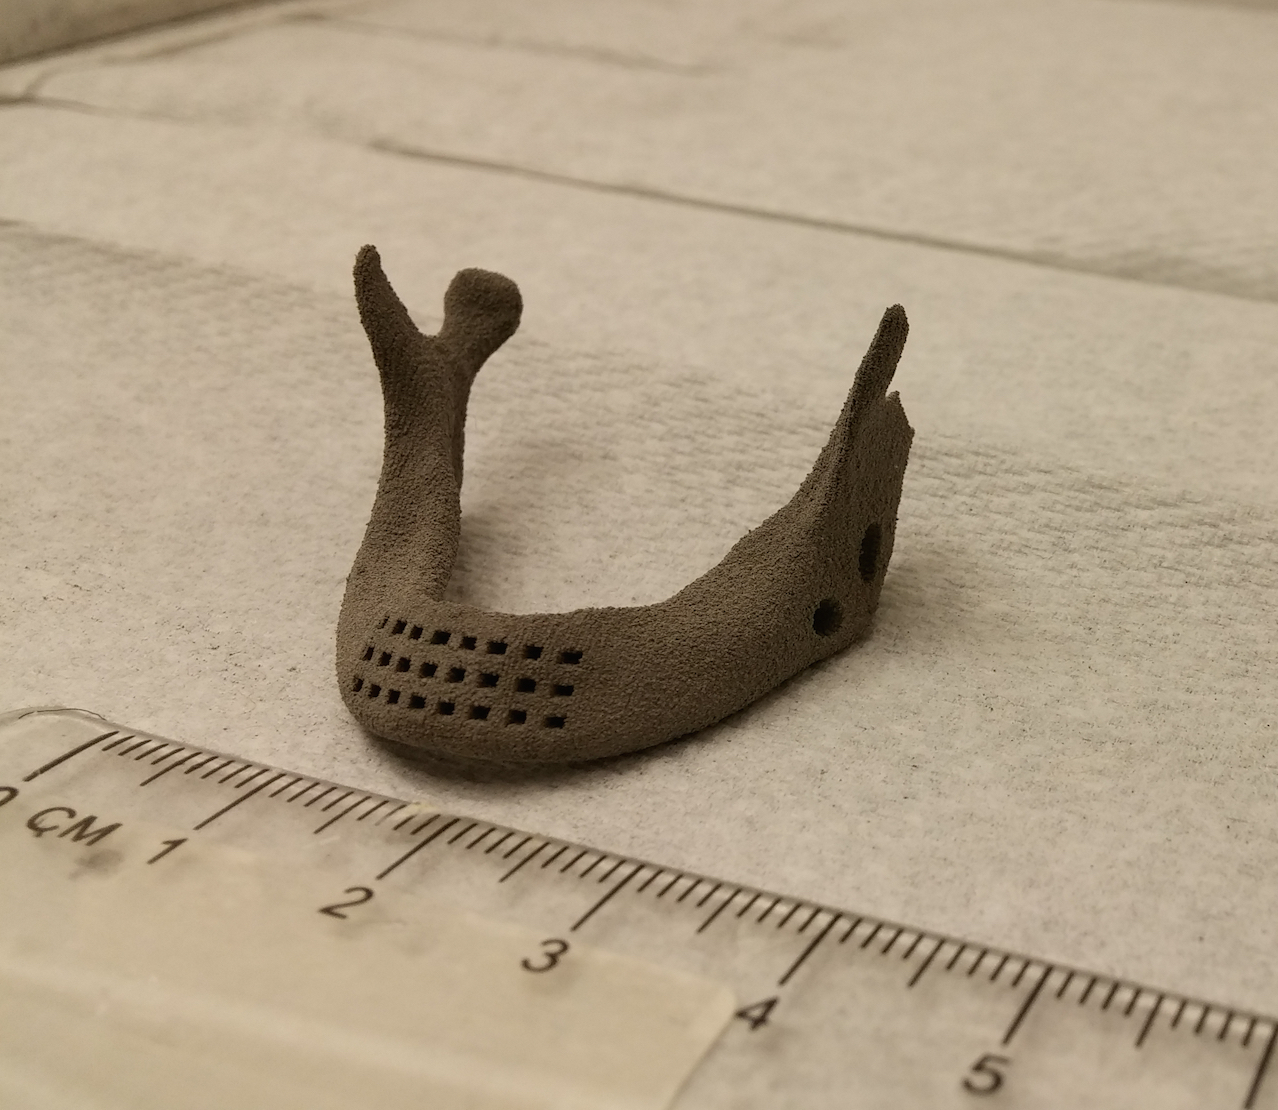 A scaled down porous human mandible made out of the alloy using the binder jetting approach.